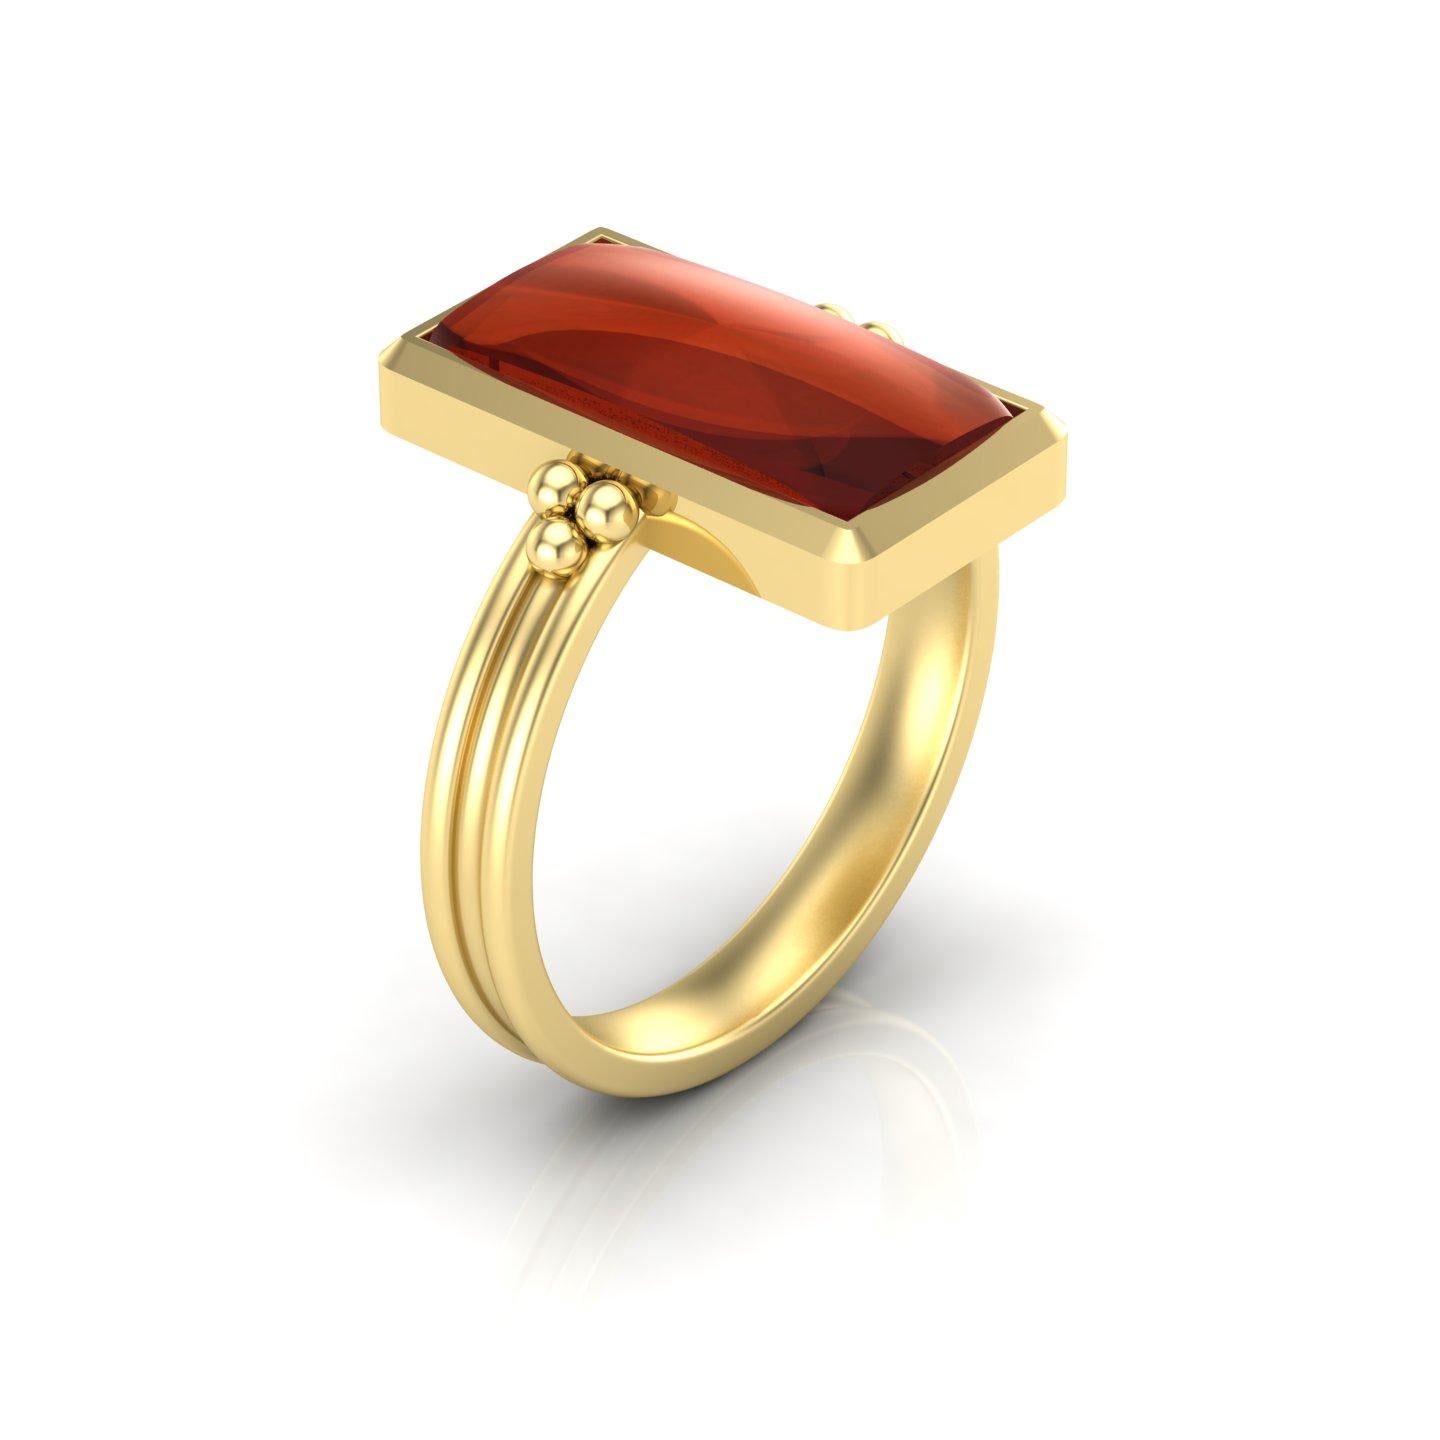 For Sale:  22 Karat Gold Garnet Ring by Romae Jewelry - Inspired by Ancient Designs 6